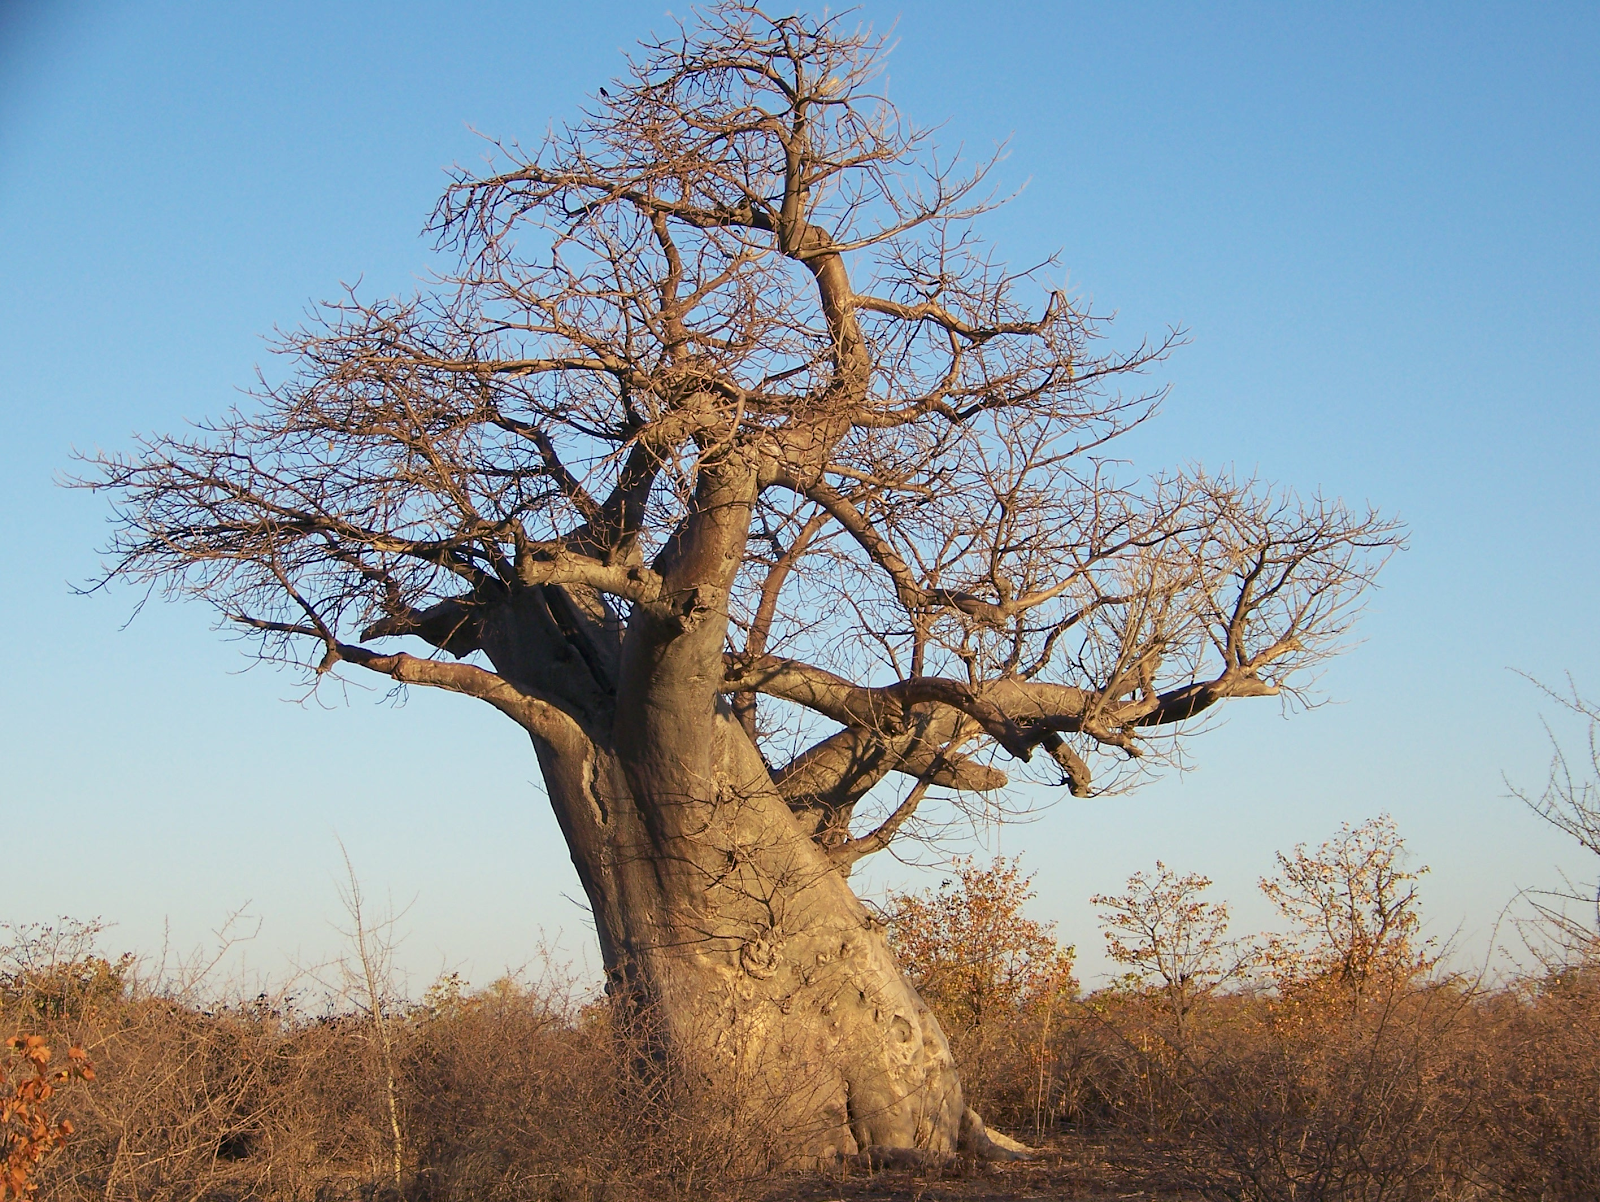 the baobab - an iconic tree 